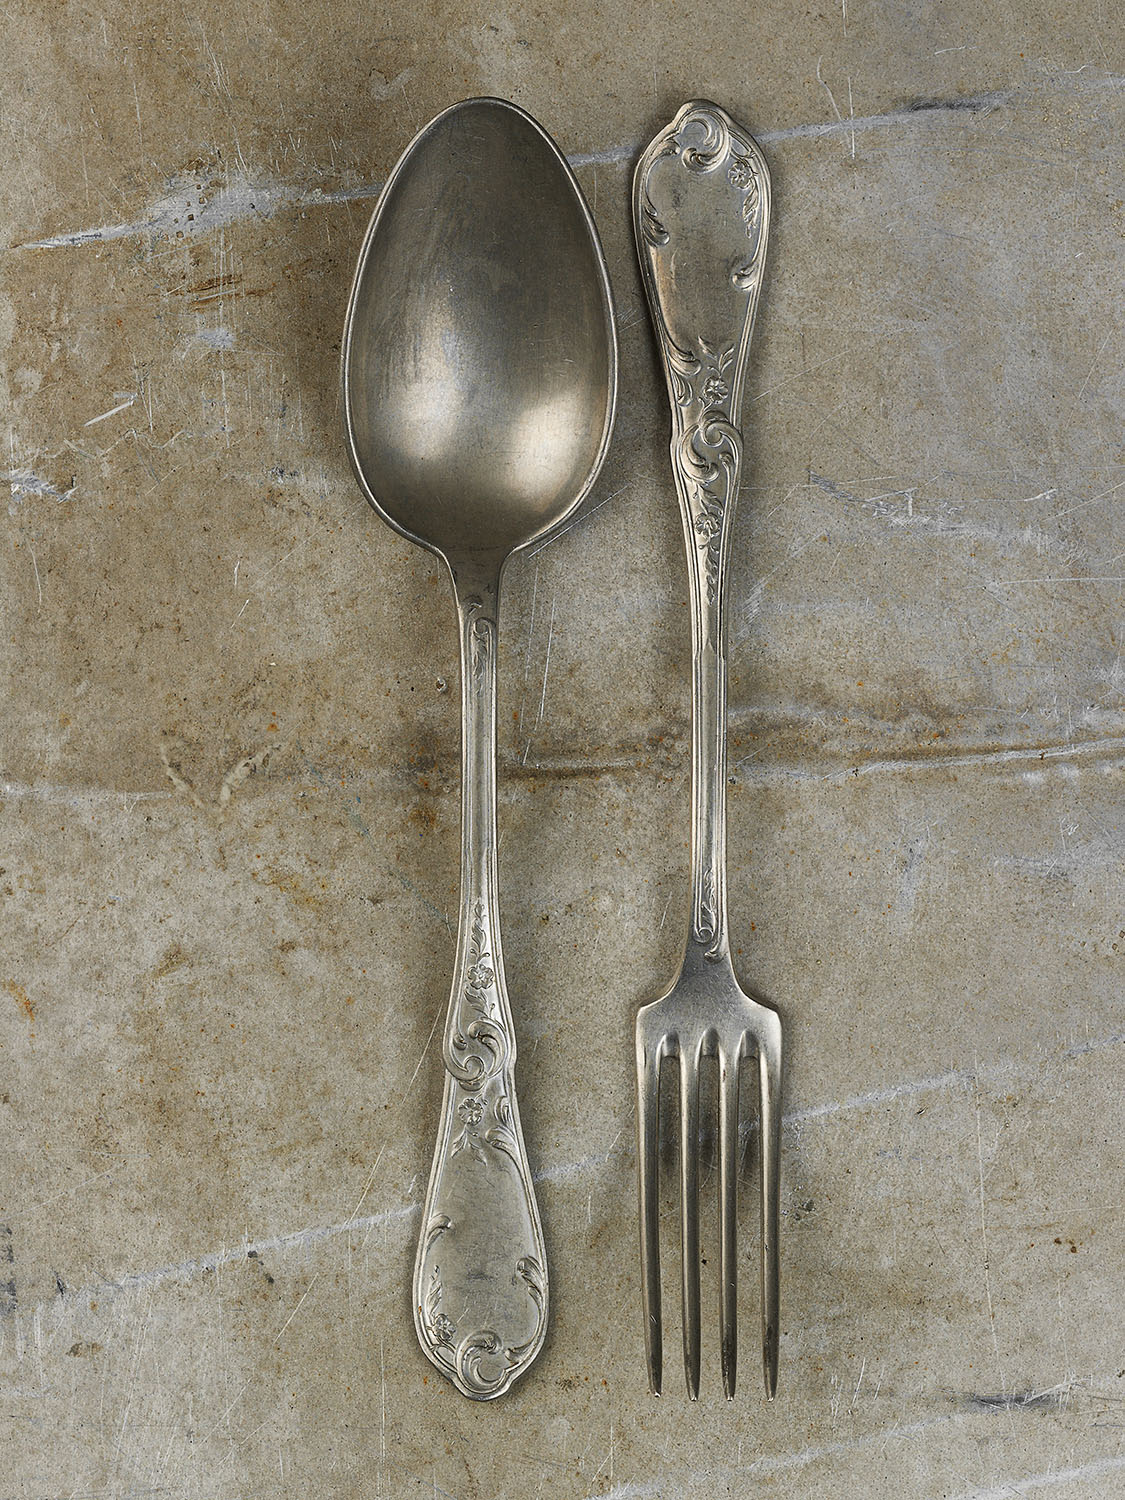 #54 French Spoon & Fork